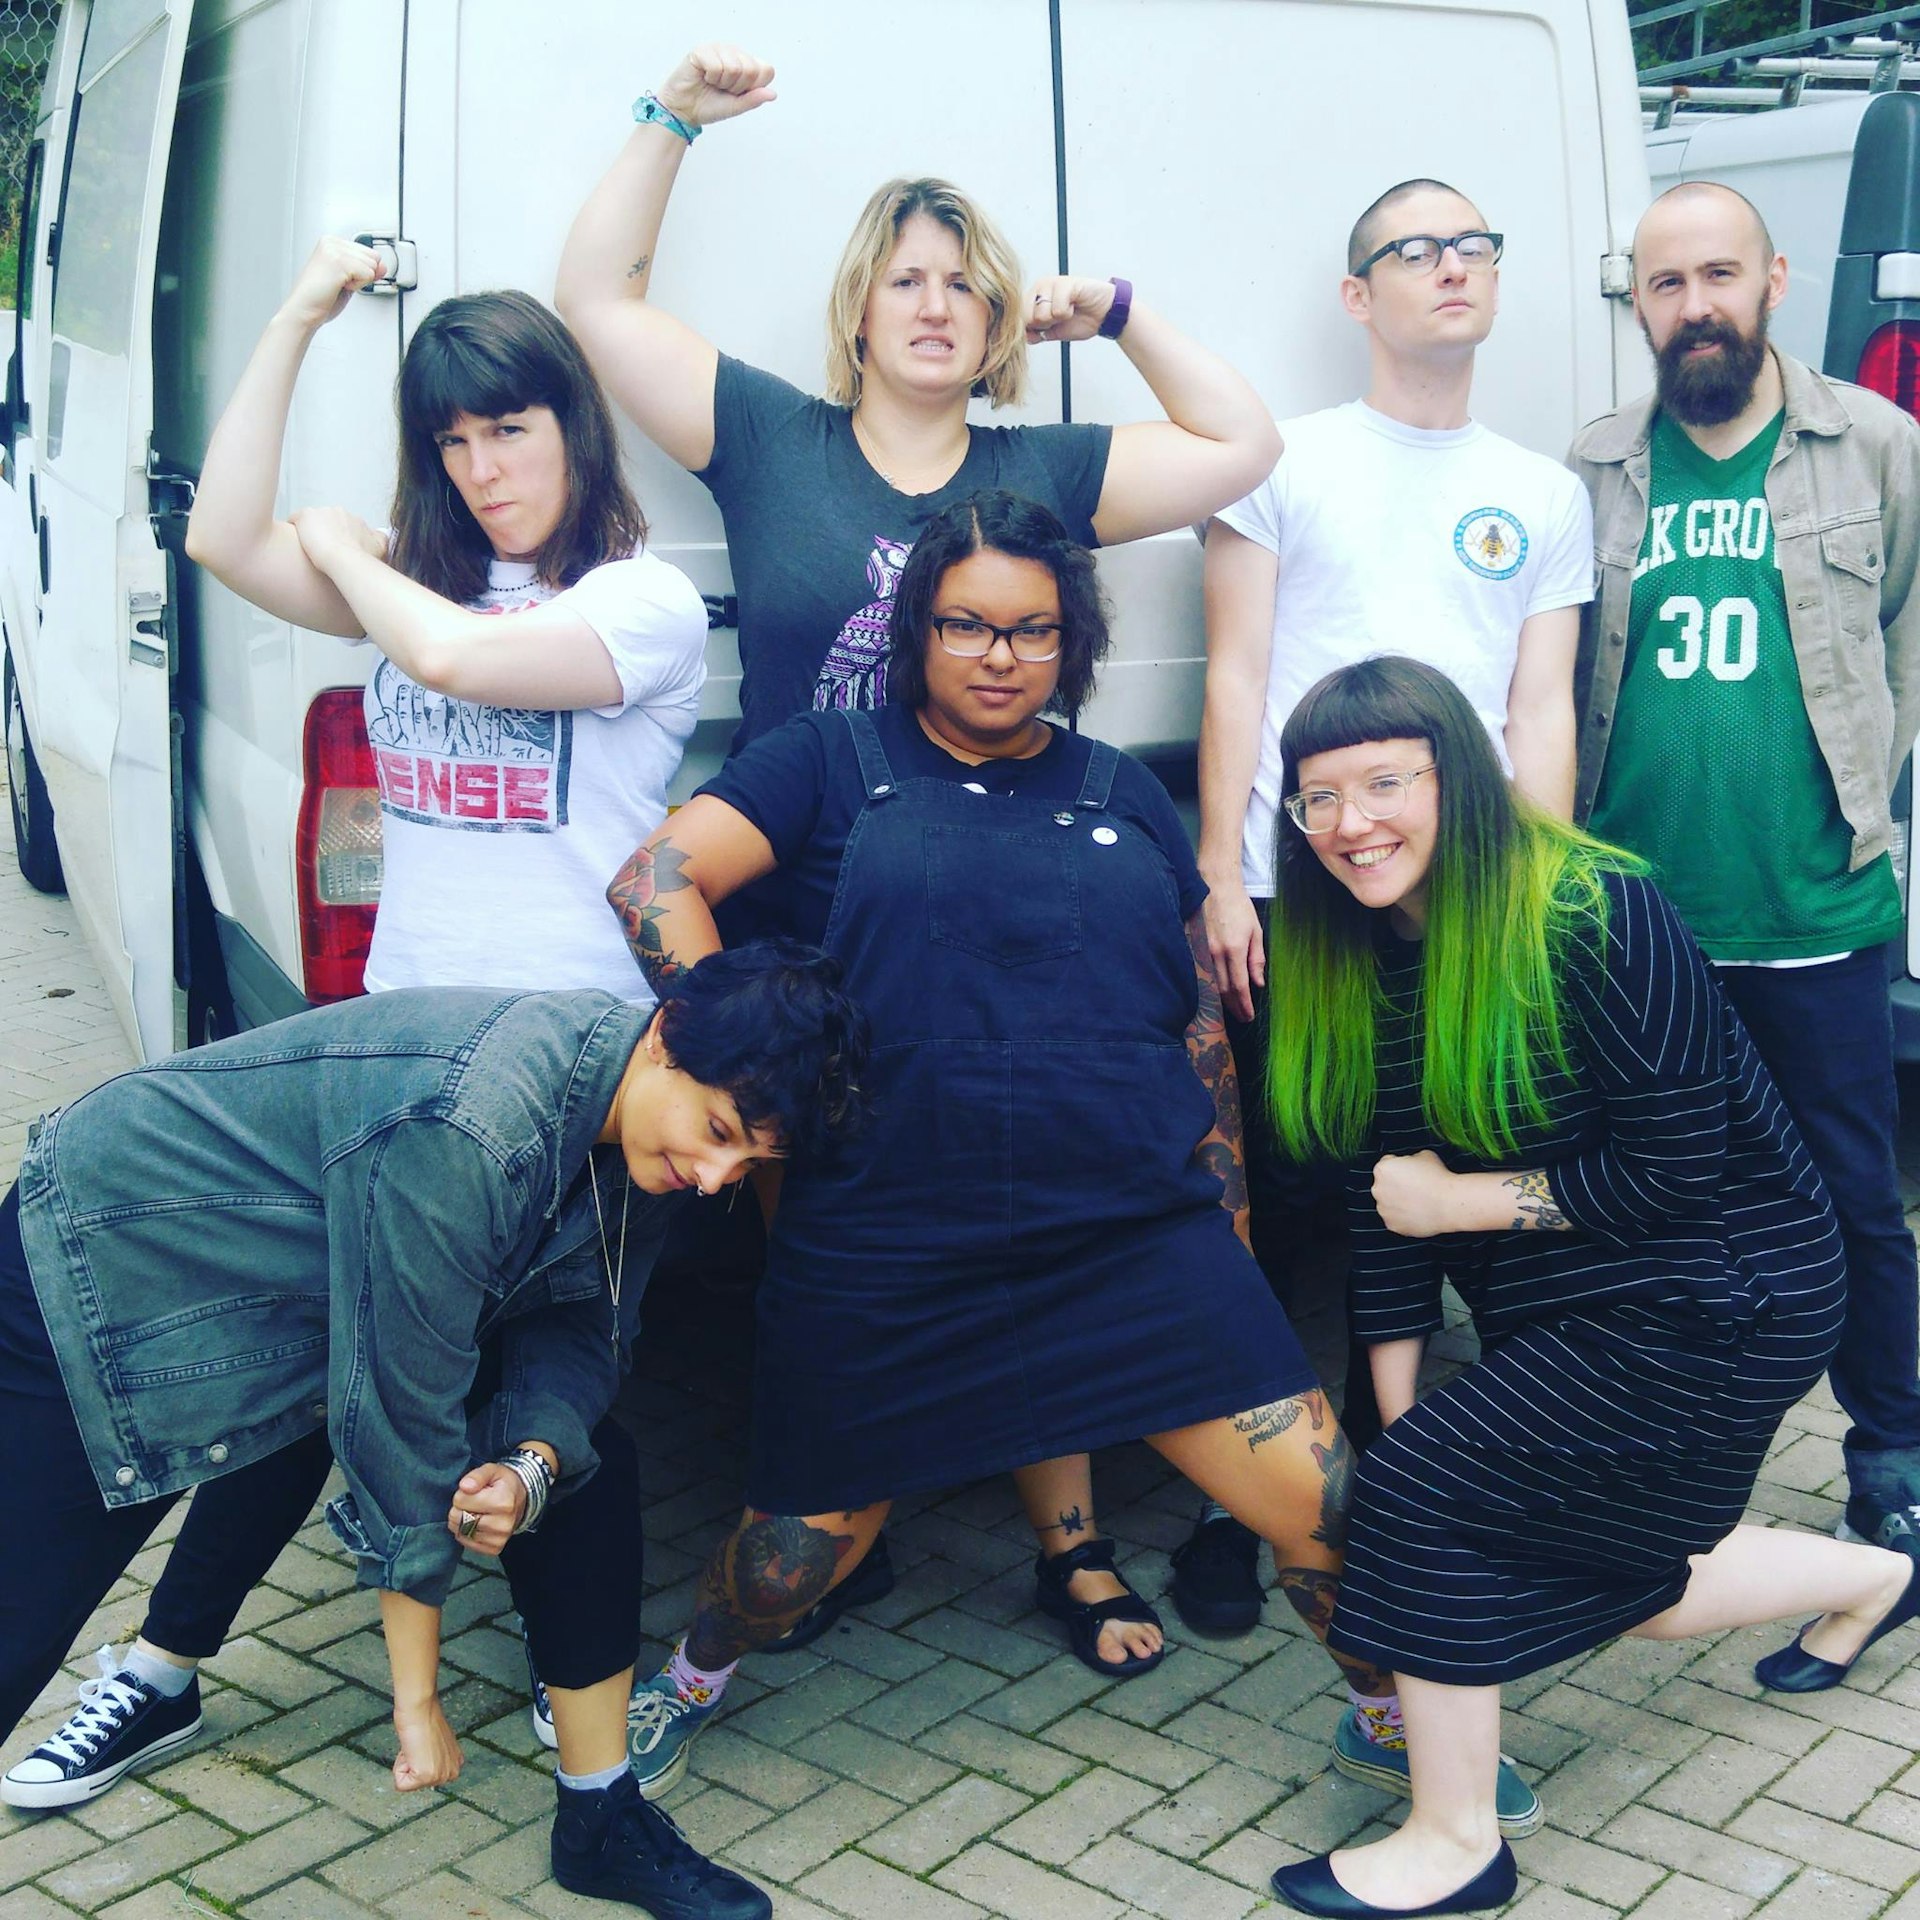 Little Fists and Fight Rosa Fight! on tour with their driver JC. Photo by Kate Rosanne.